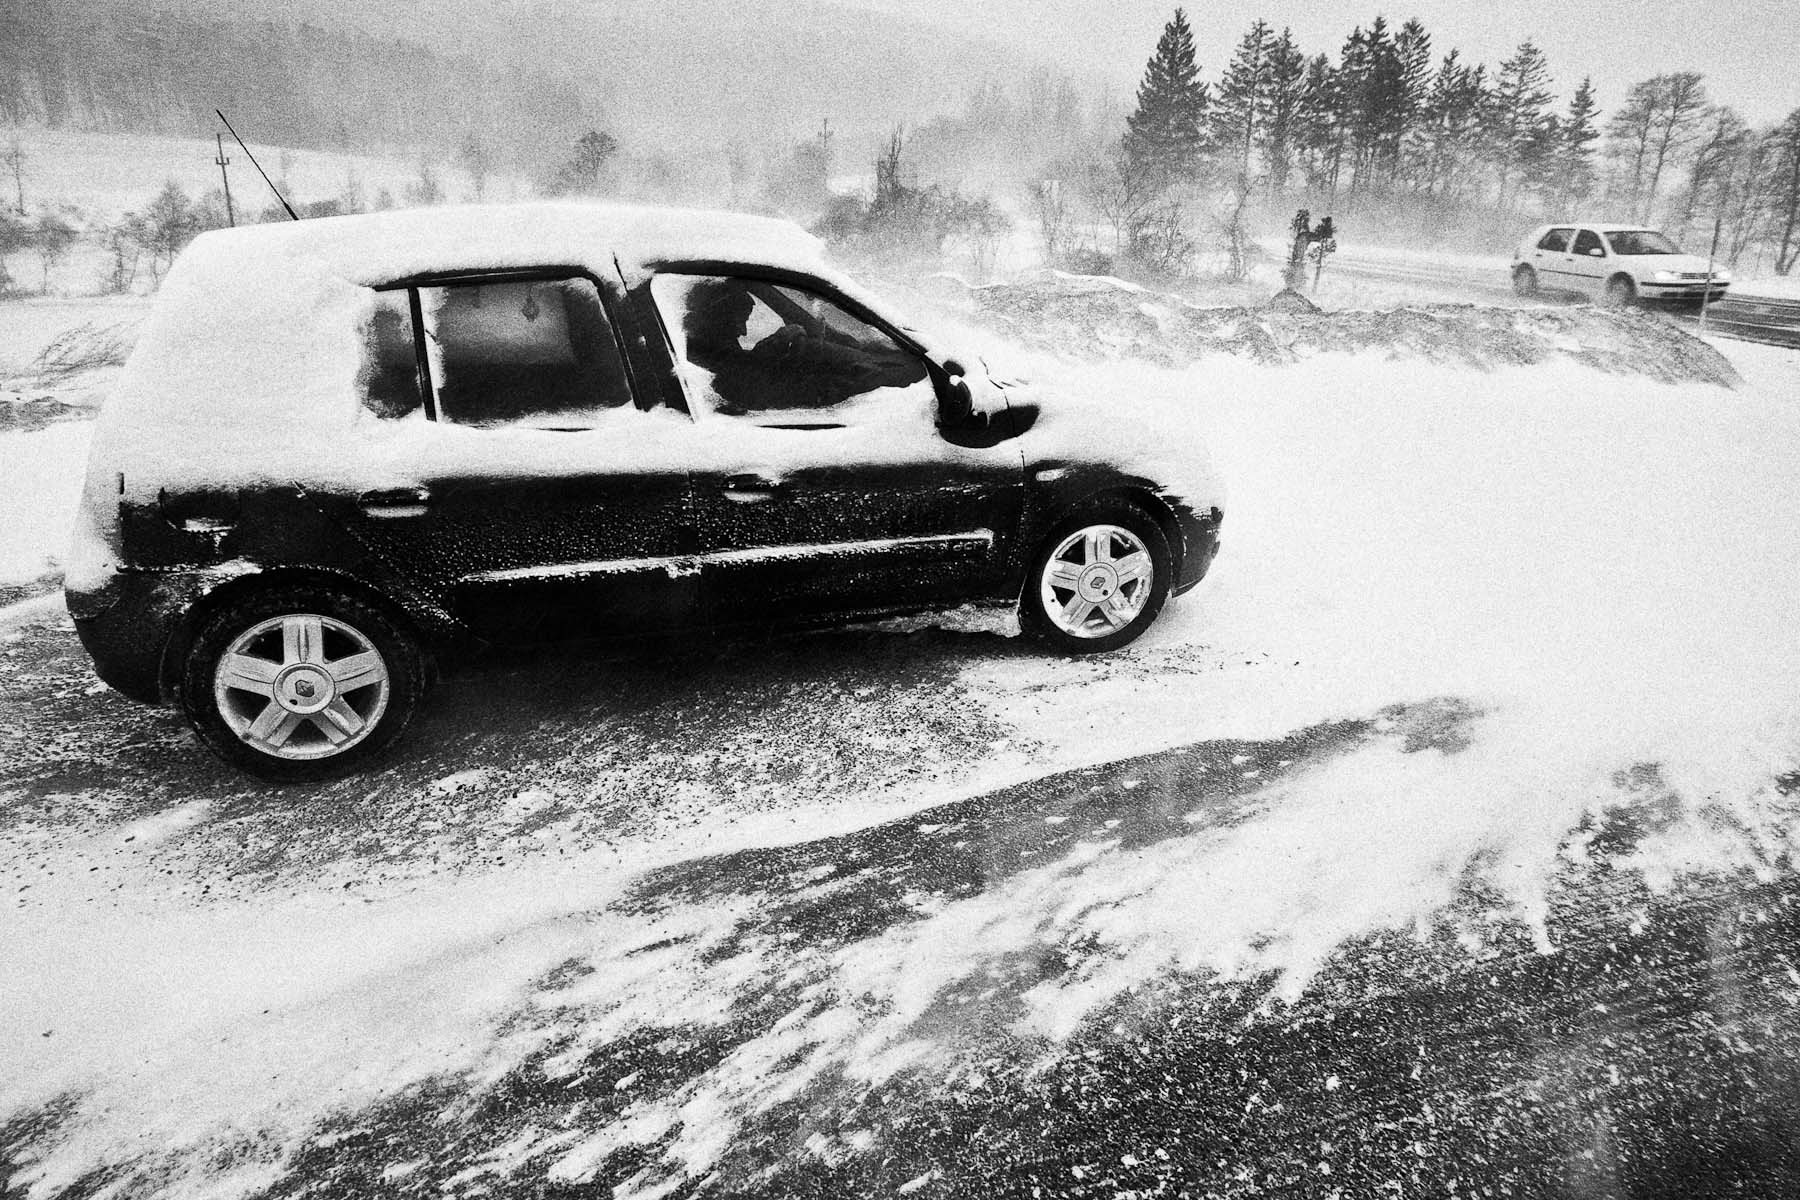 A man tries to start his car in extreme Bora wind and blizzard near Razdrto, Slovenia, on March 10, 2010.